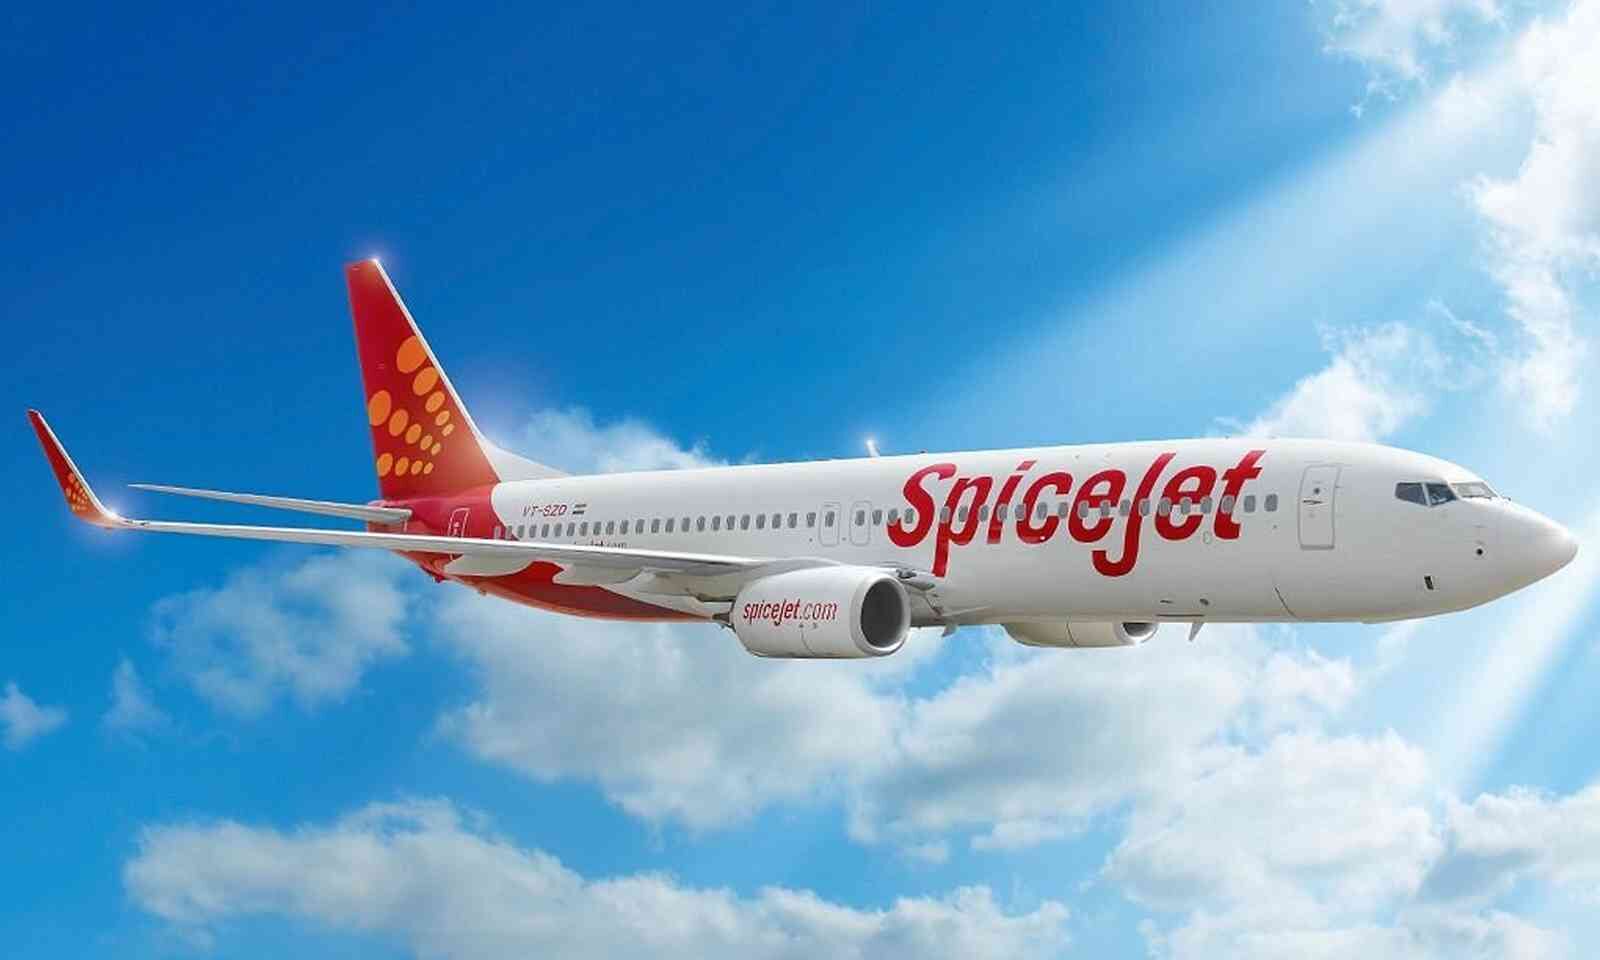 SpiceJet to lay off 1,000 people, citing ‘cost-cutting strategy'